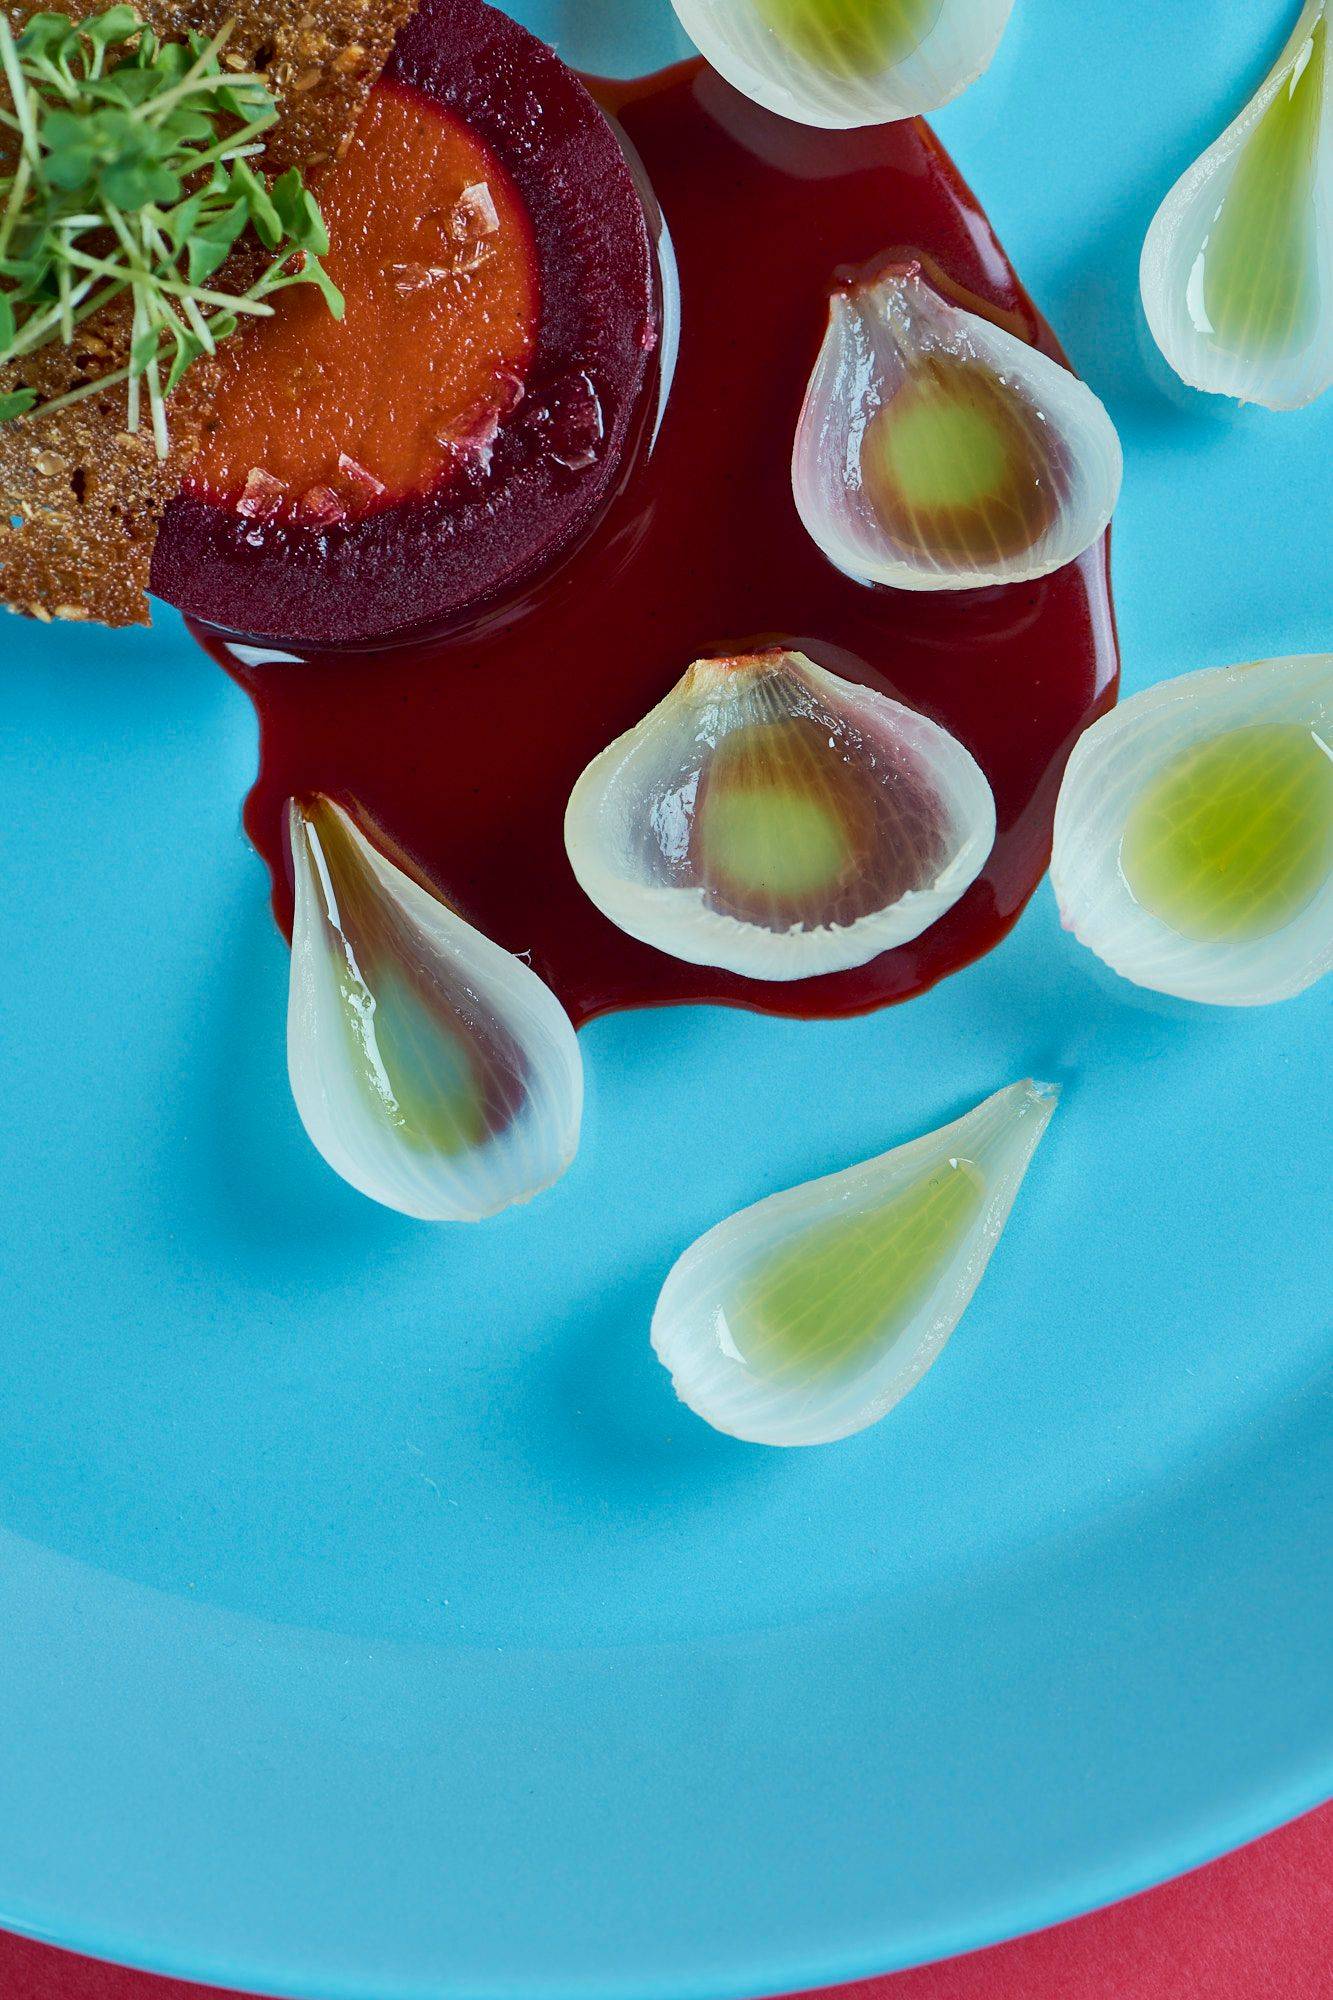 baked beets with onions and vegan jus with chilean wine from cono sur on a blue plate with red background